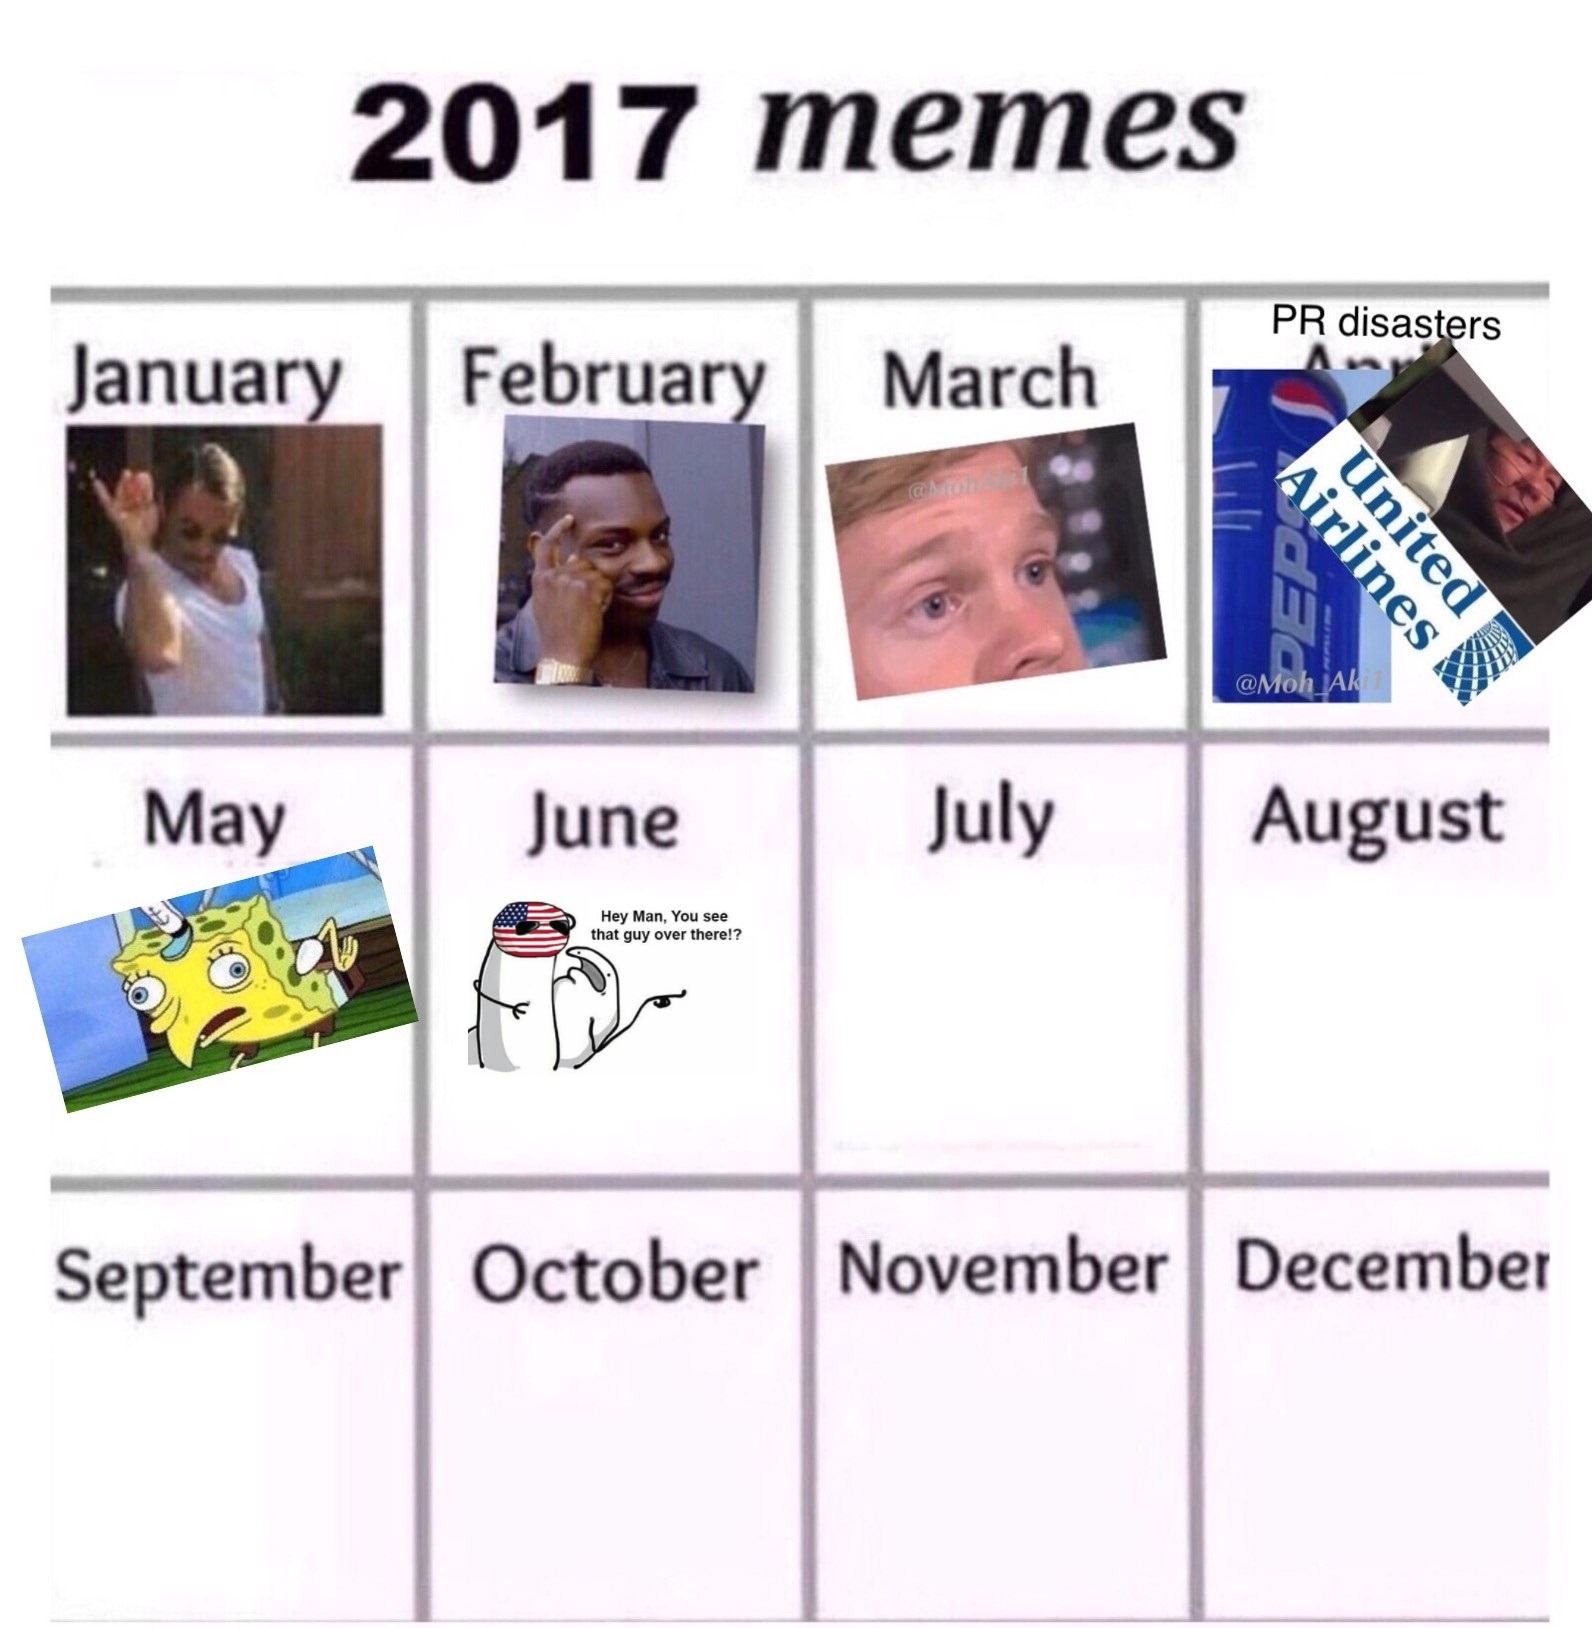 meme stream - 2017 meme calendar july - 2017 memes Pr disasters January February March Airlines United Ak May June July | August Hey Man, You see that guy over there!? September October November December